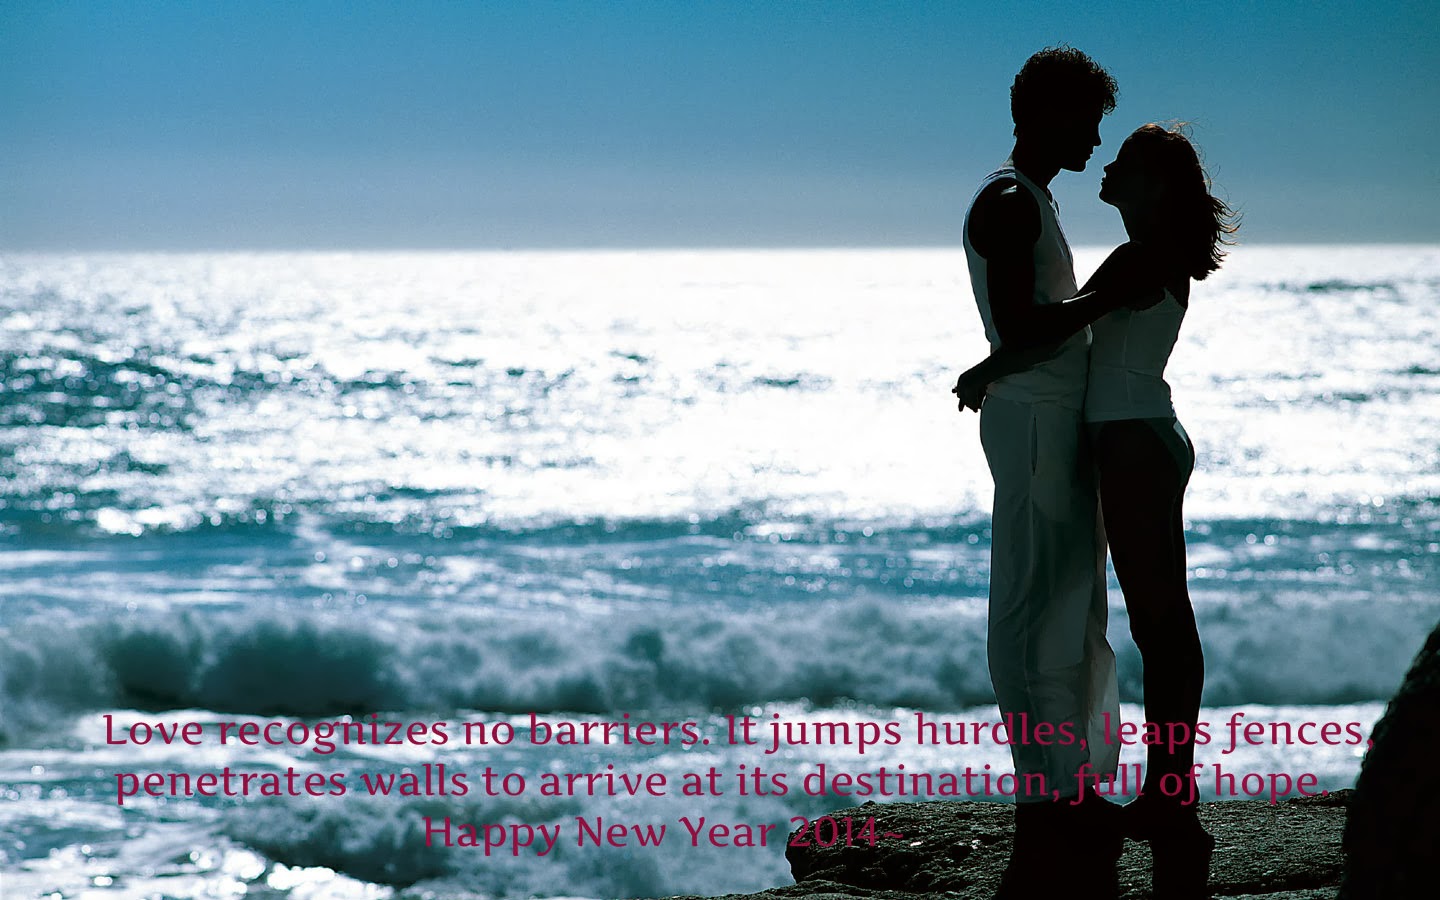 Happy New Year Love Quotes 2014 for Lovers | Five Best New Year 2014